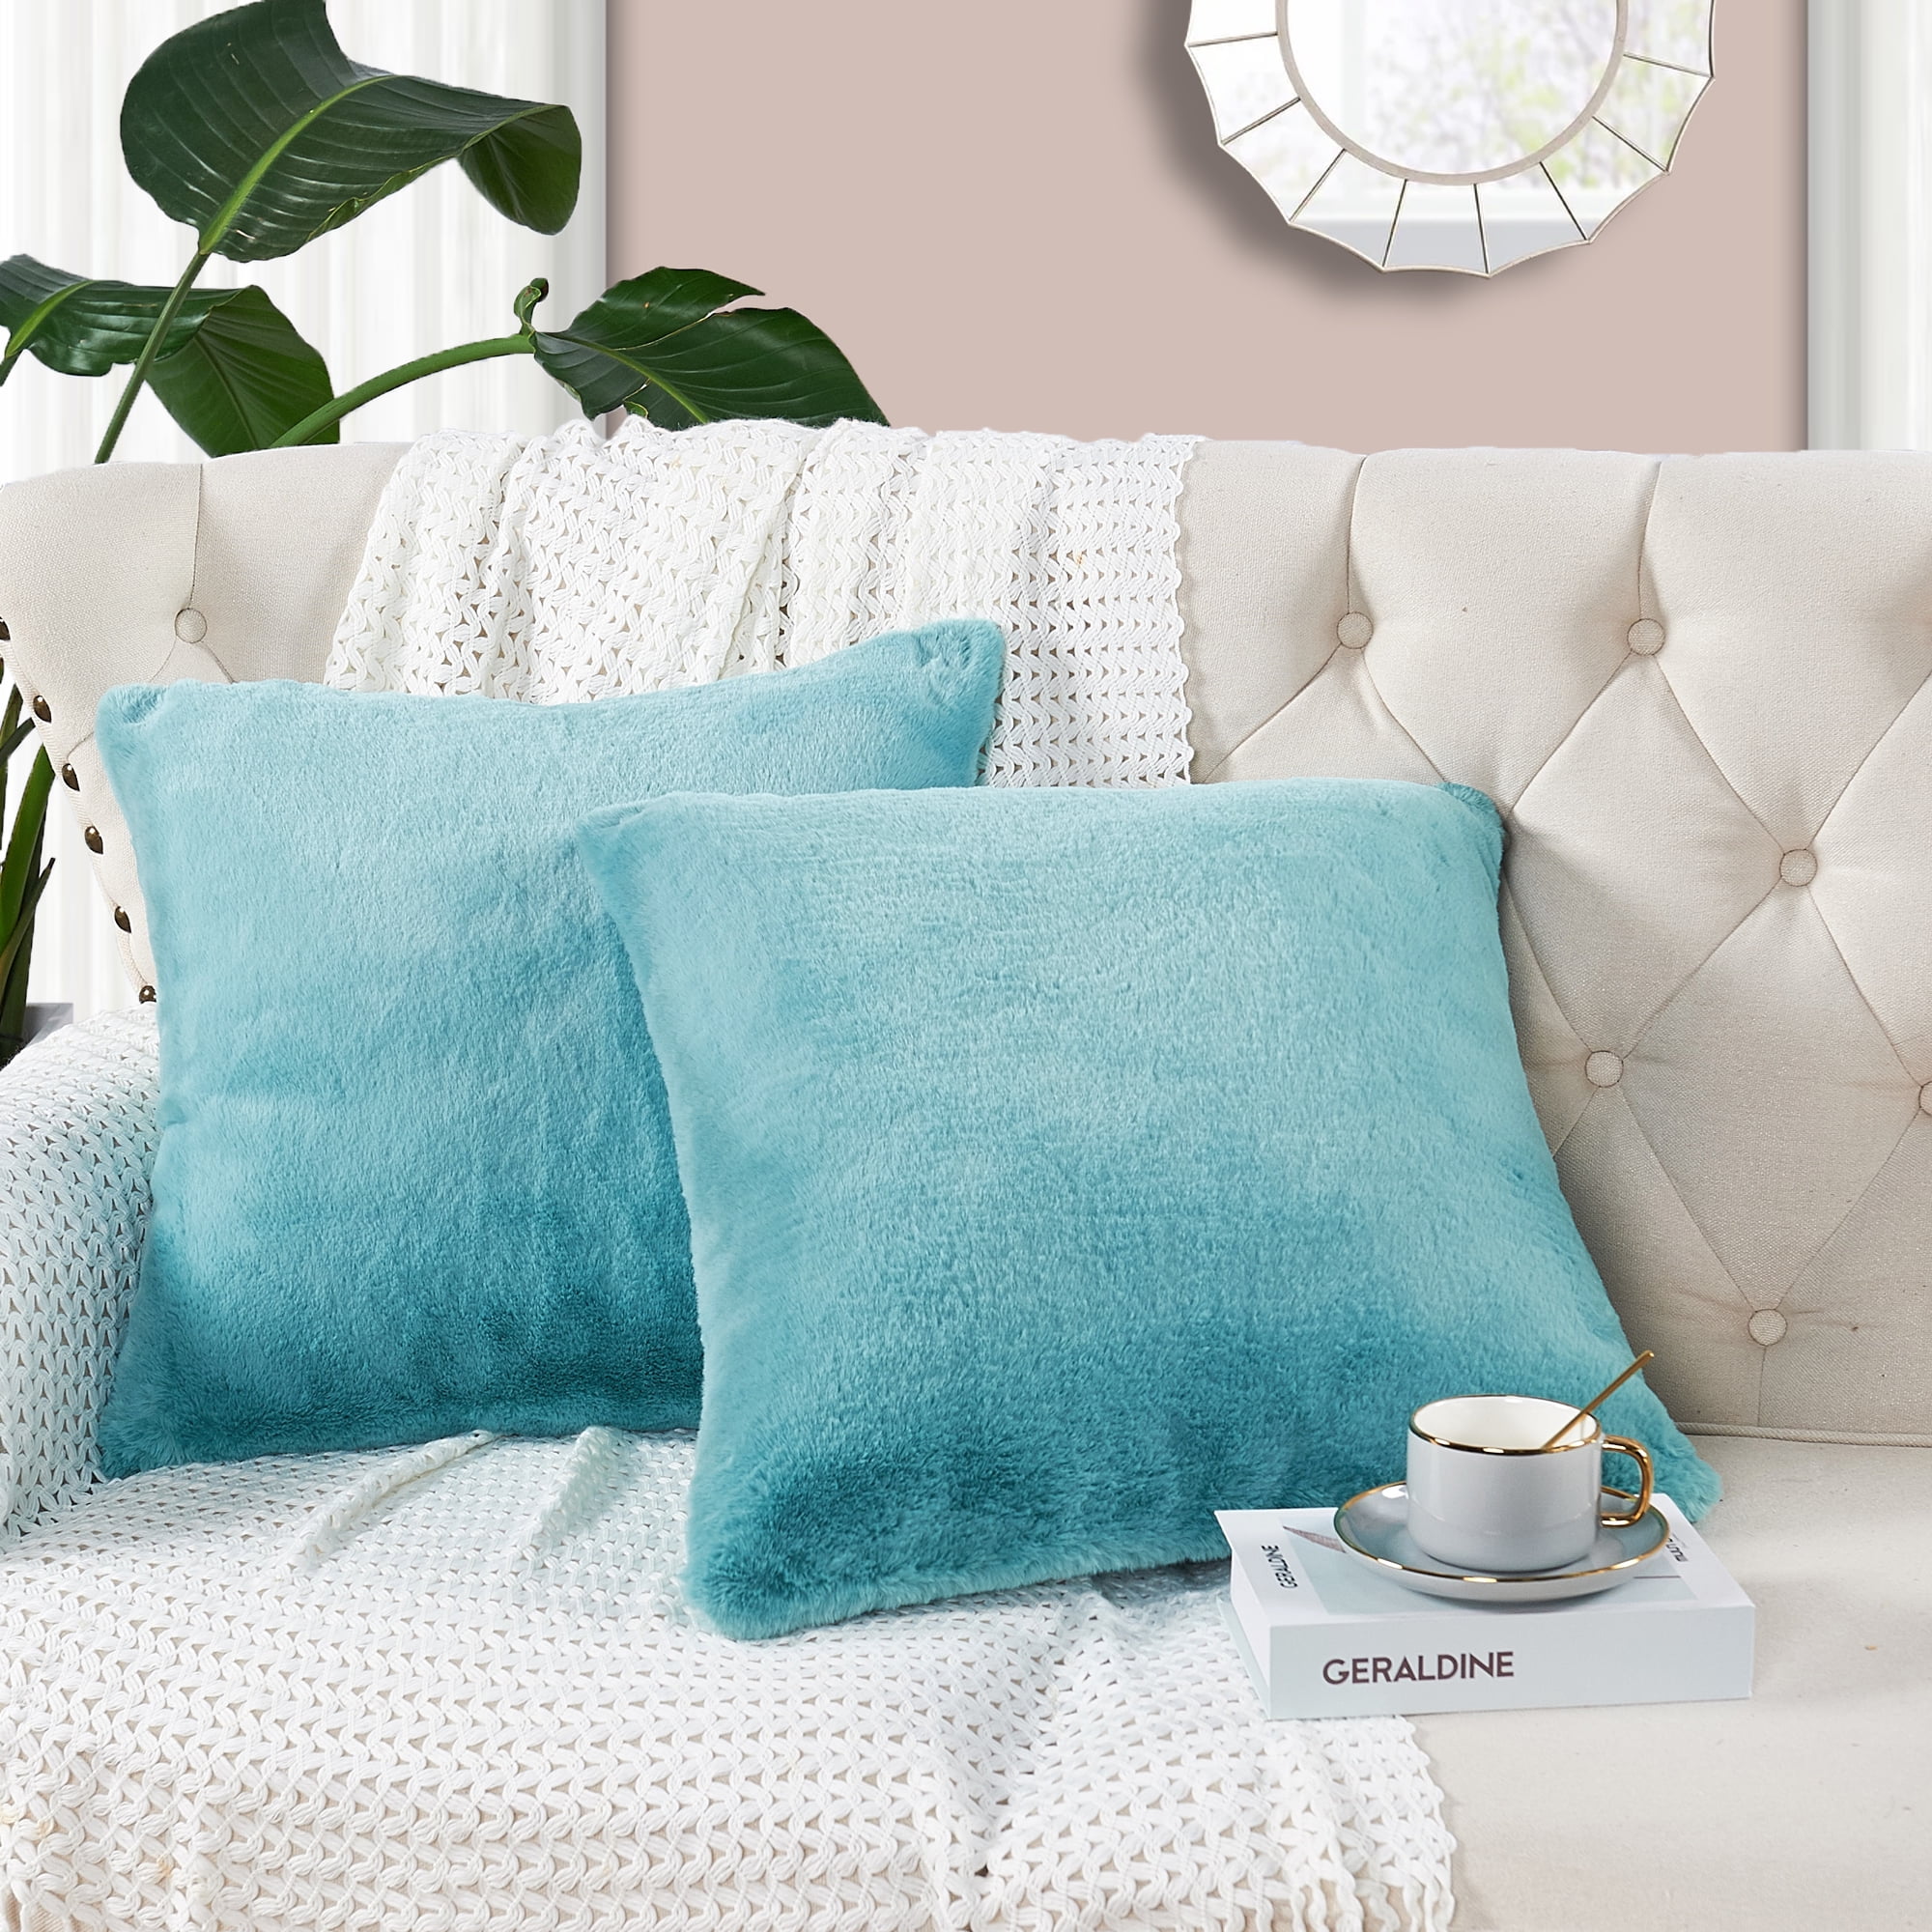 Large Throw Pillows, Teal Aqua Gray and Turquoise Blue Couch